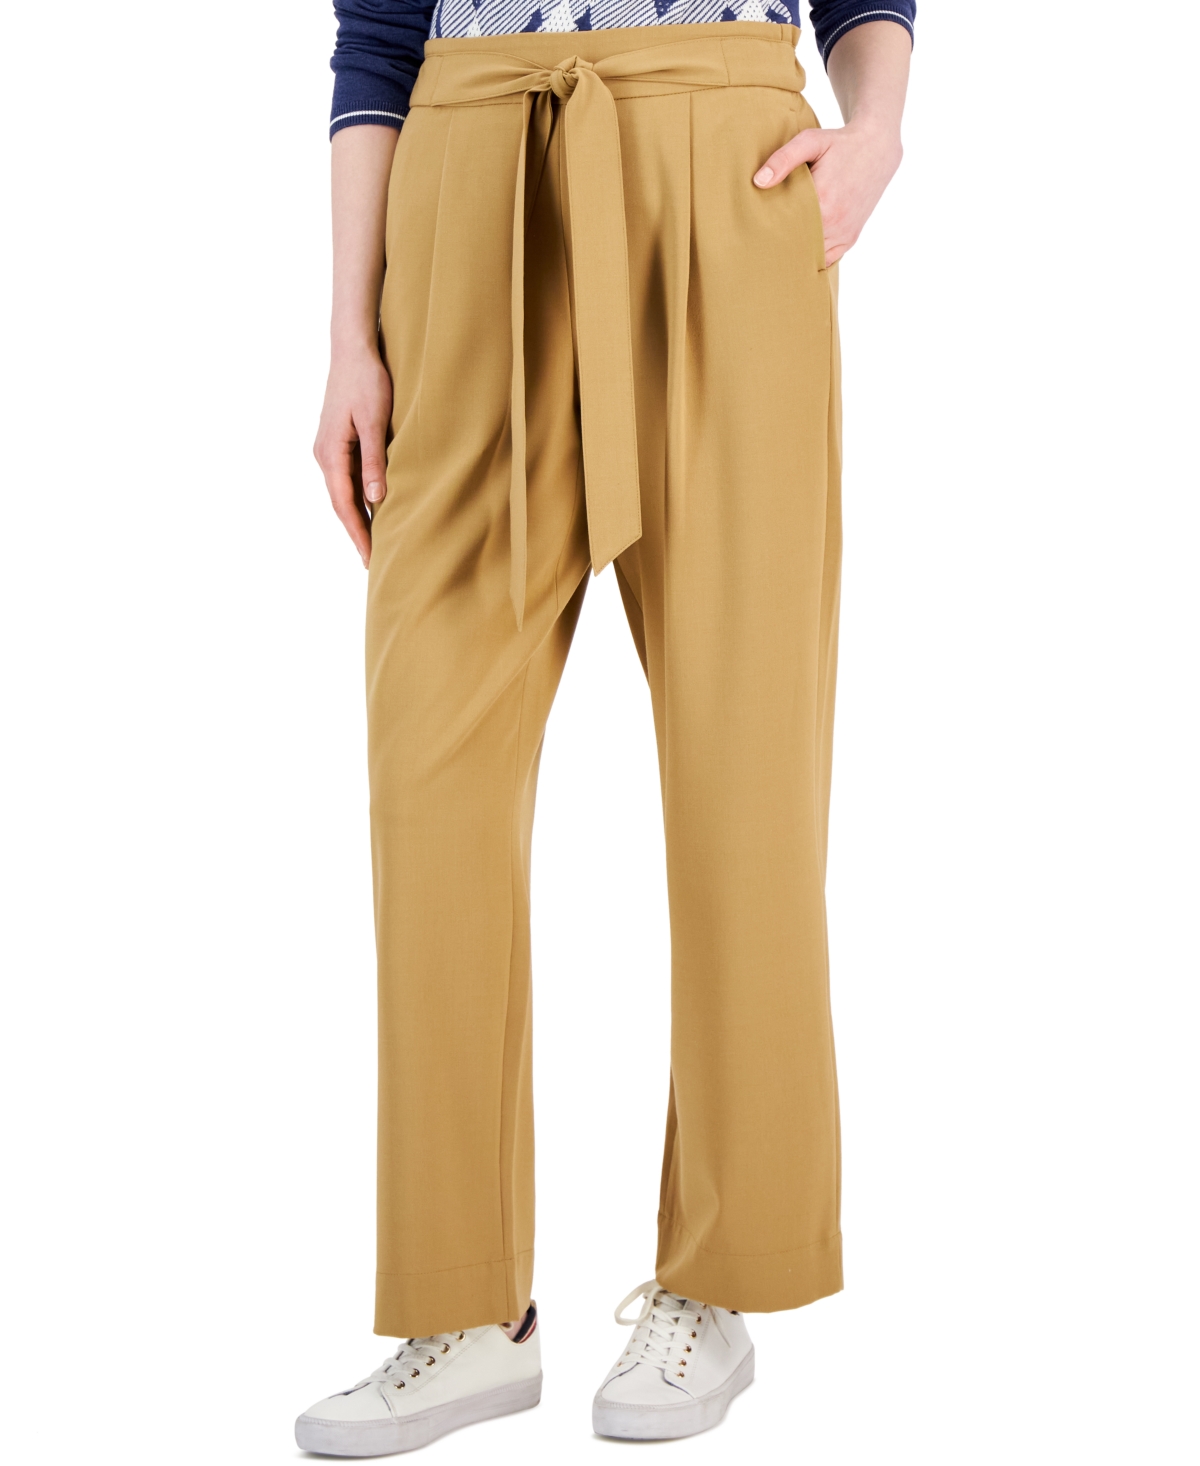 Buy Tommy Hilfiger Pants, Clothing Online